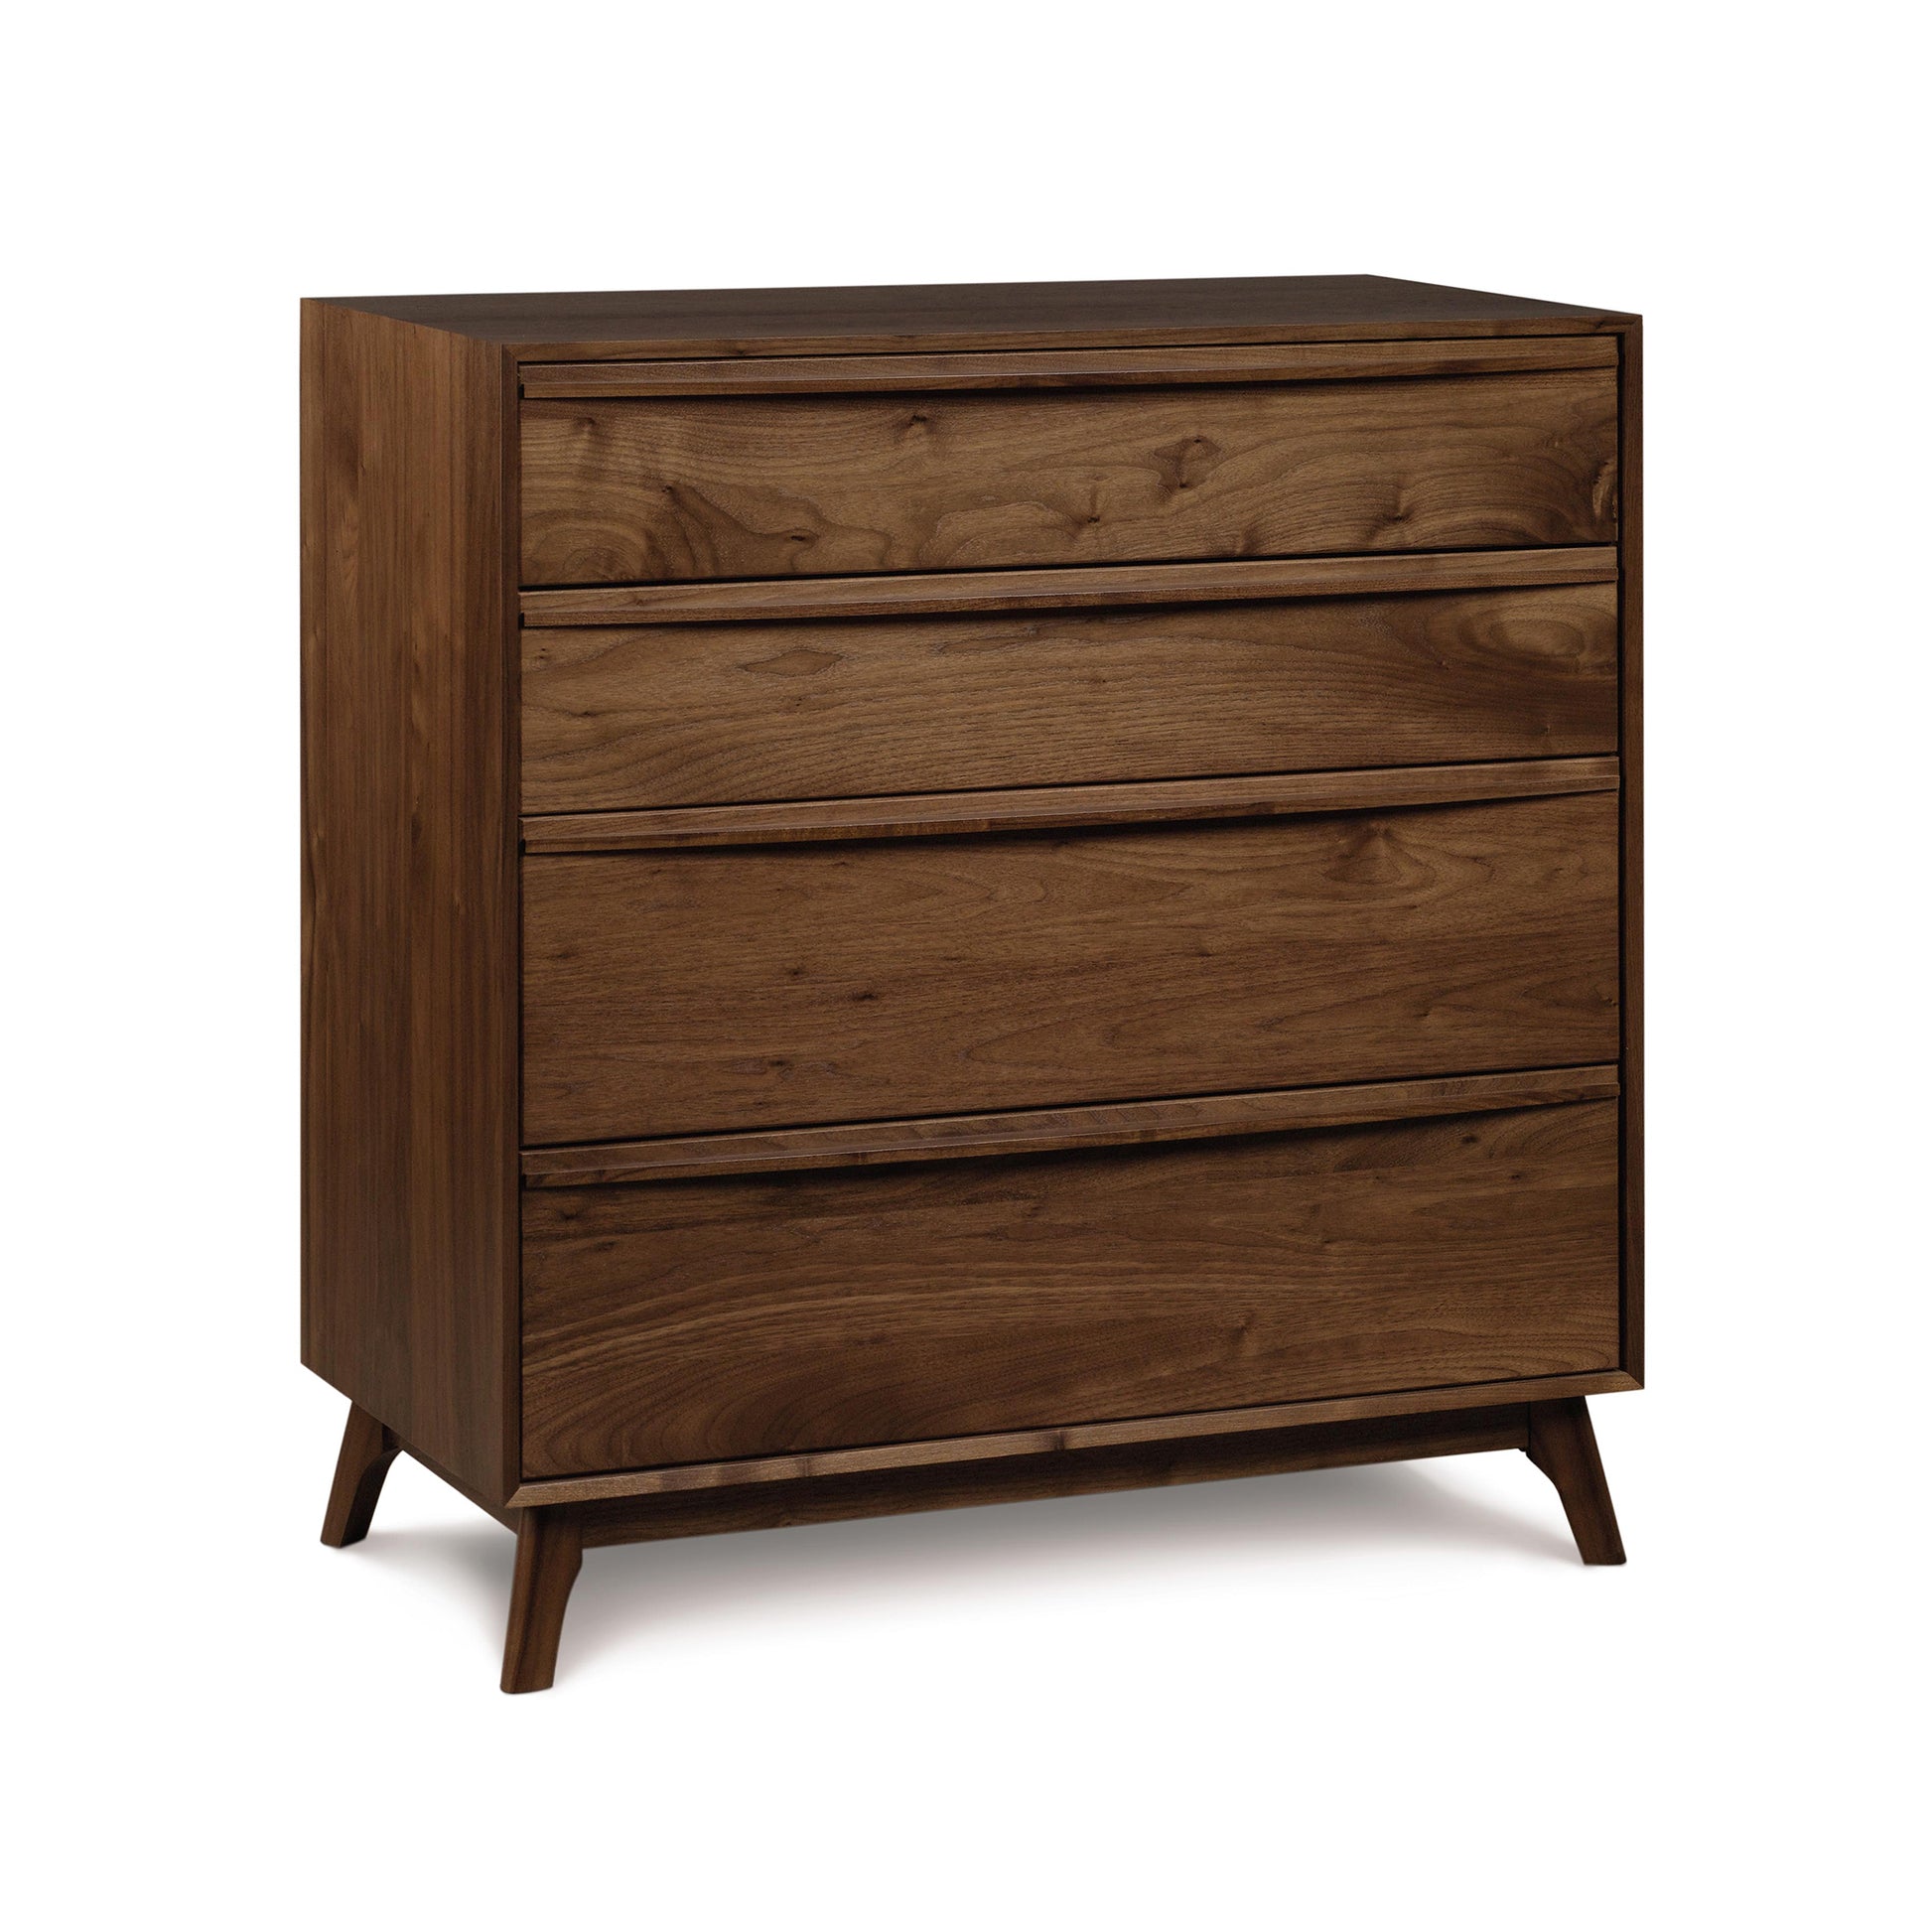 The Copeland Furniture Catalina 4-Drawer Chest is a modern chest of drawers with wooden legs. It is handmade in Vermont and perfect for a modern bedroom.